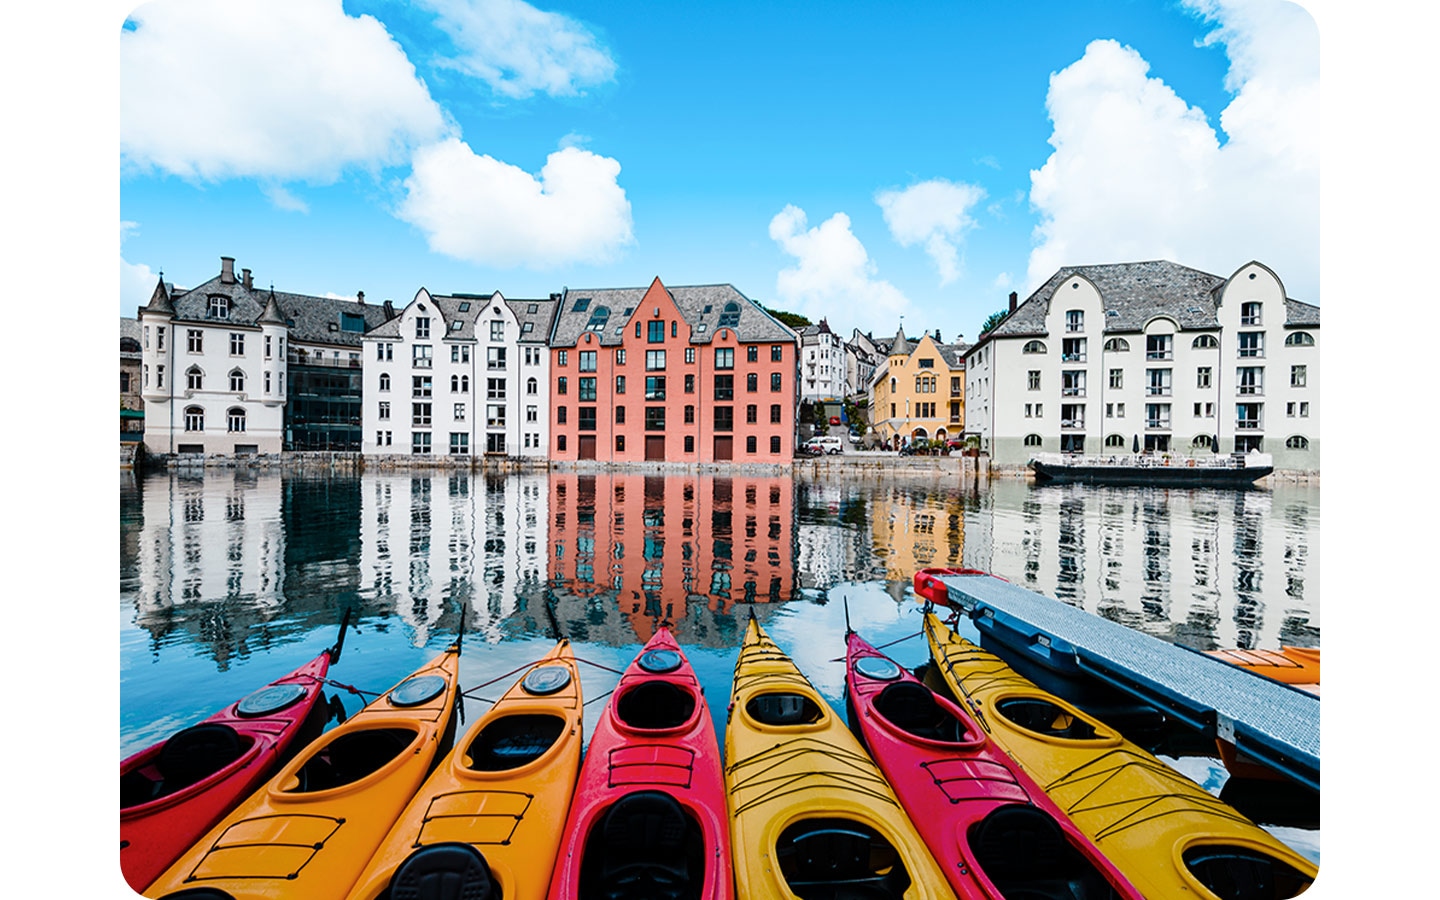 Ultra-wide angle icon activated, the shot includes much more of the canoes, more buildings in the background and more of the sky.  Ultra-wide angle are above a landscape of yellow and red canoes lined up in a pier with white and red buildings in the far background. "